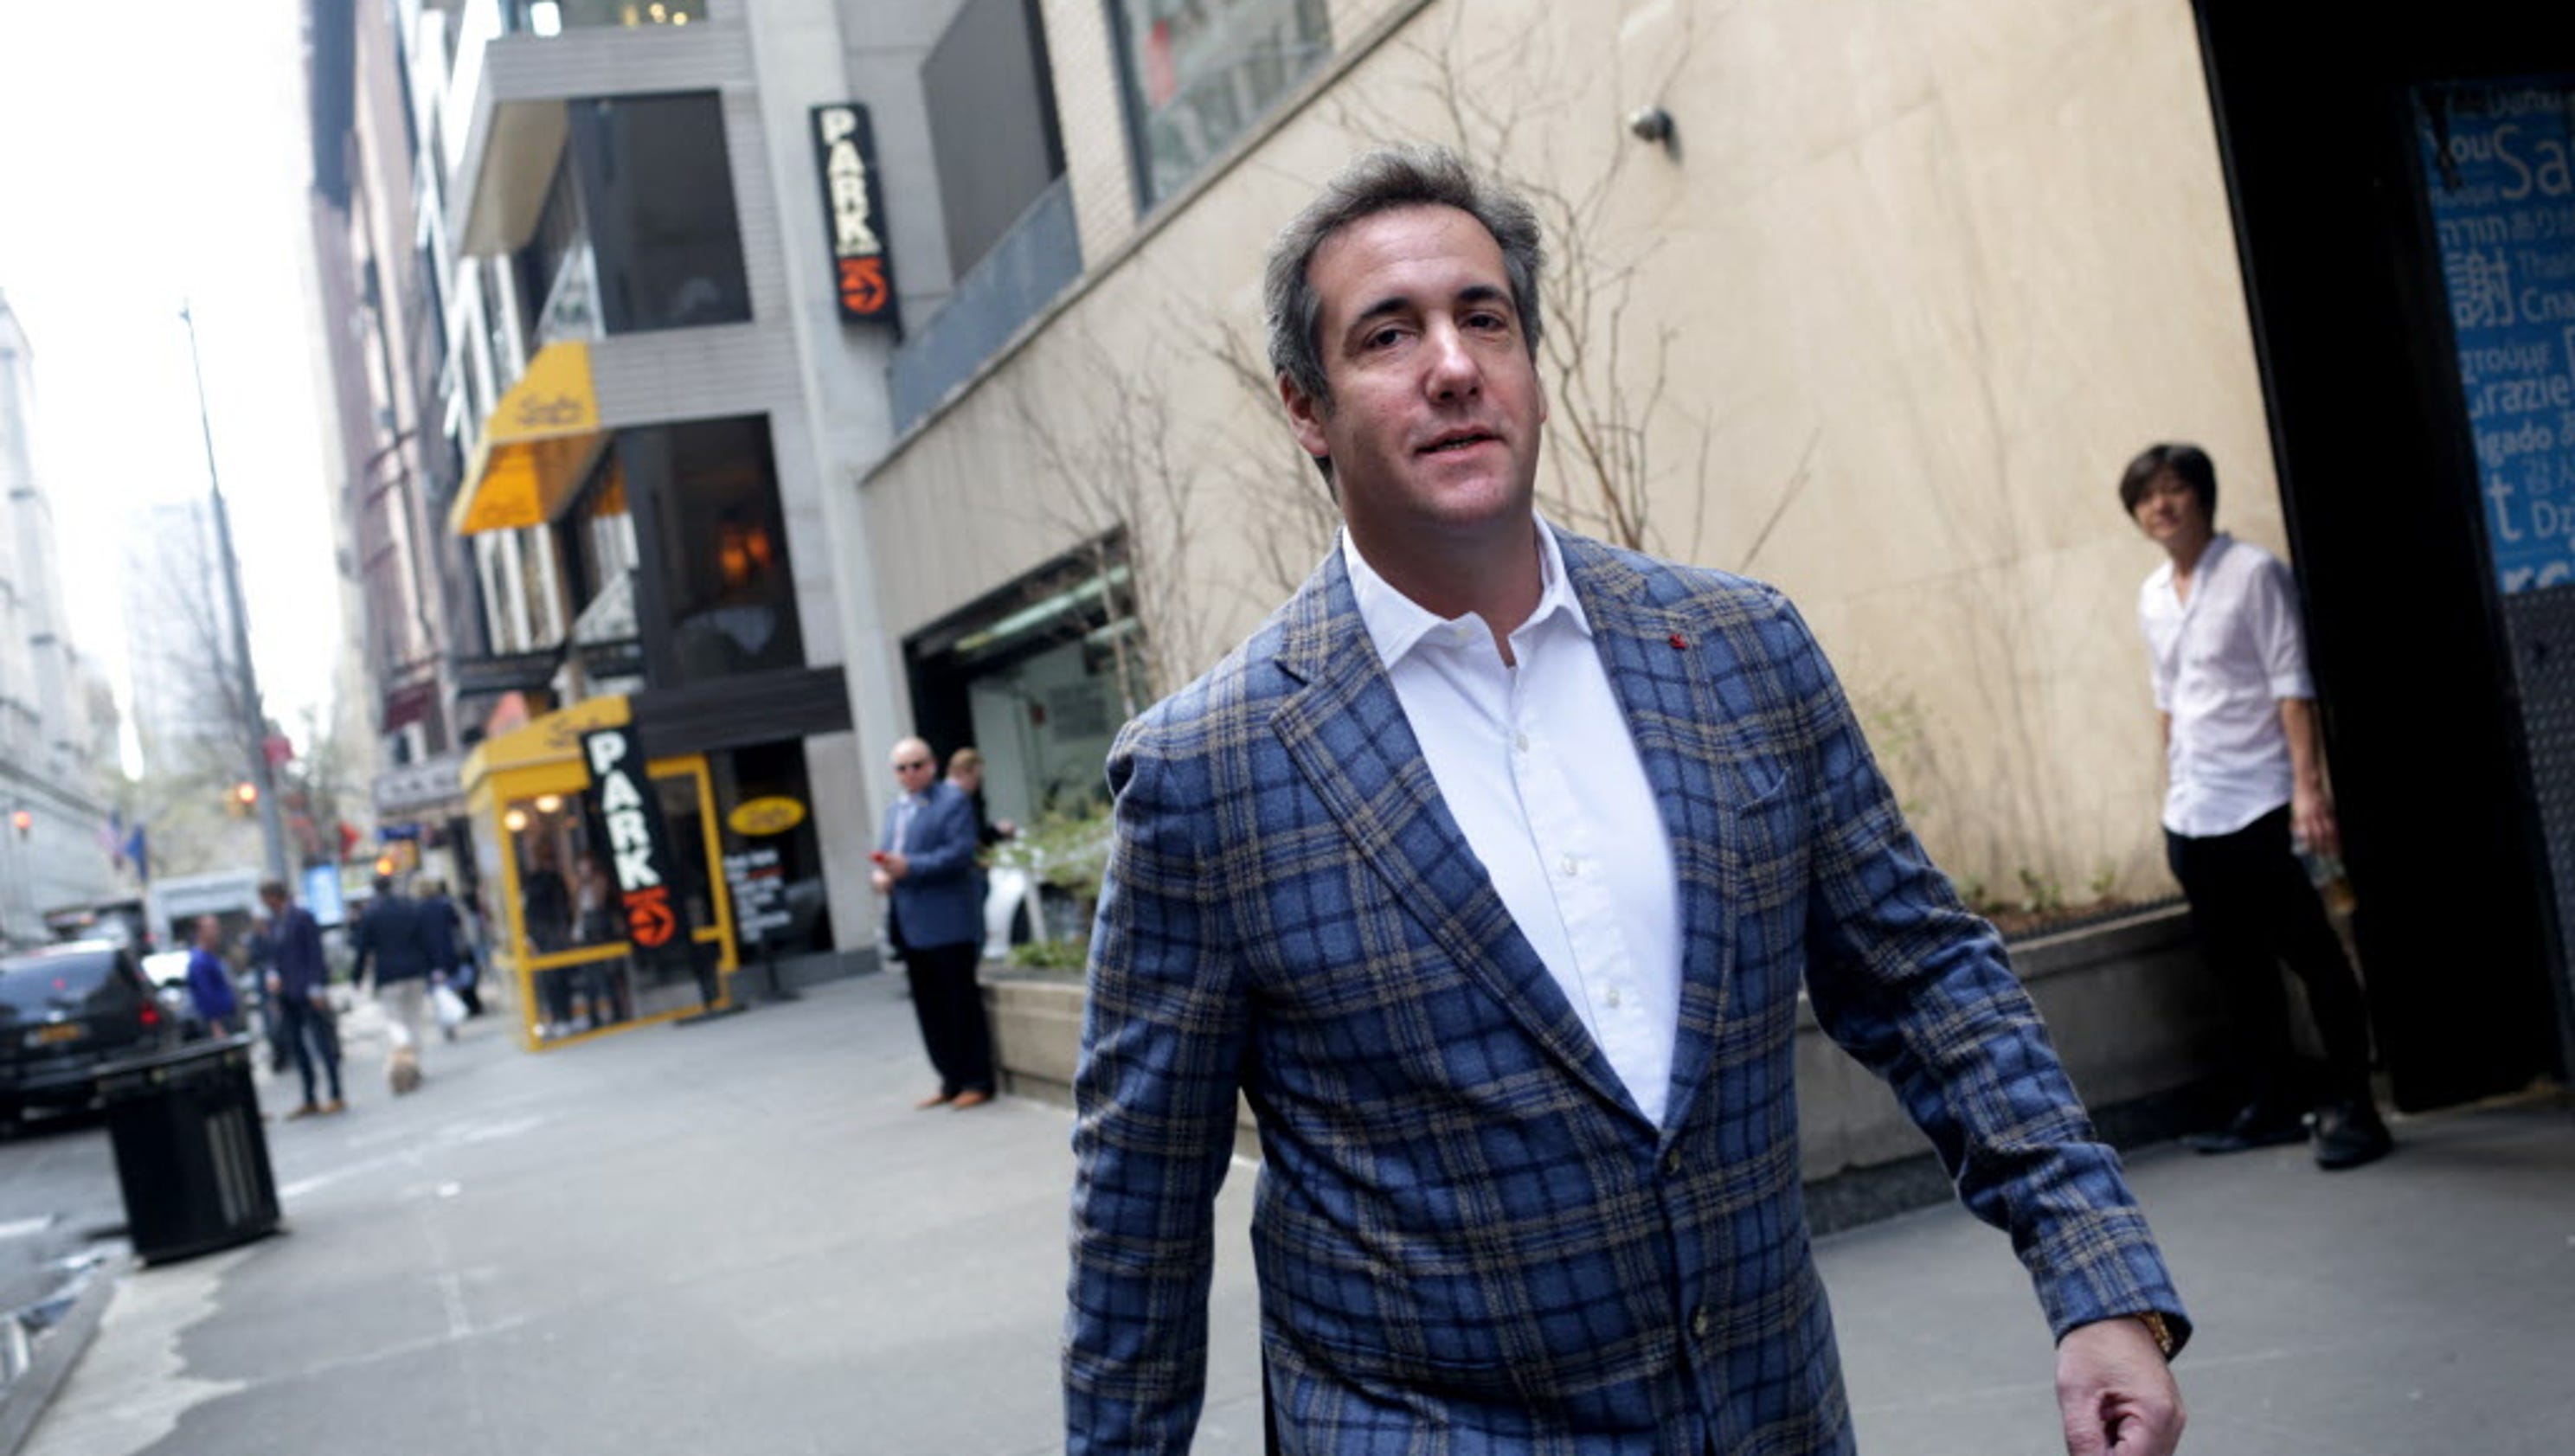 Fbi Raid Judge Asked To Let Trump Review Evidence Seized From Cohen